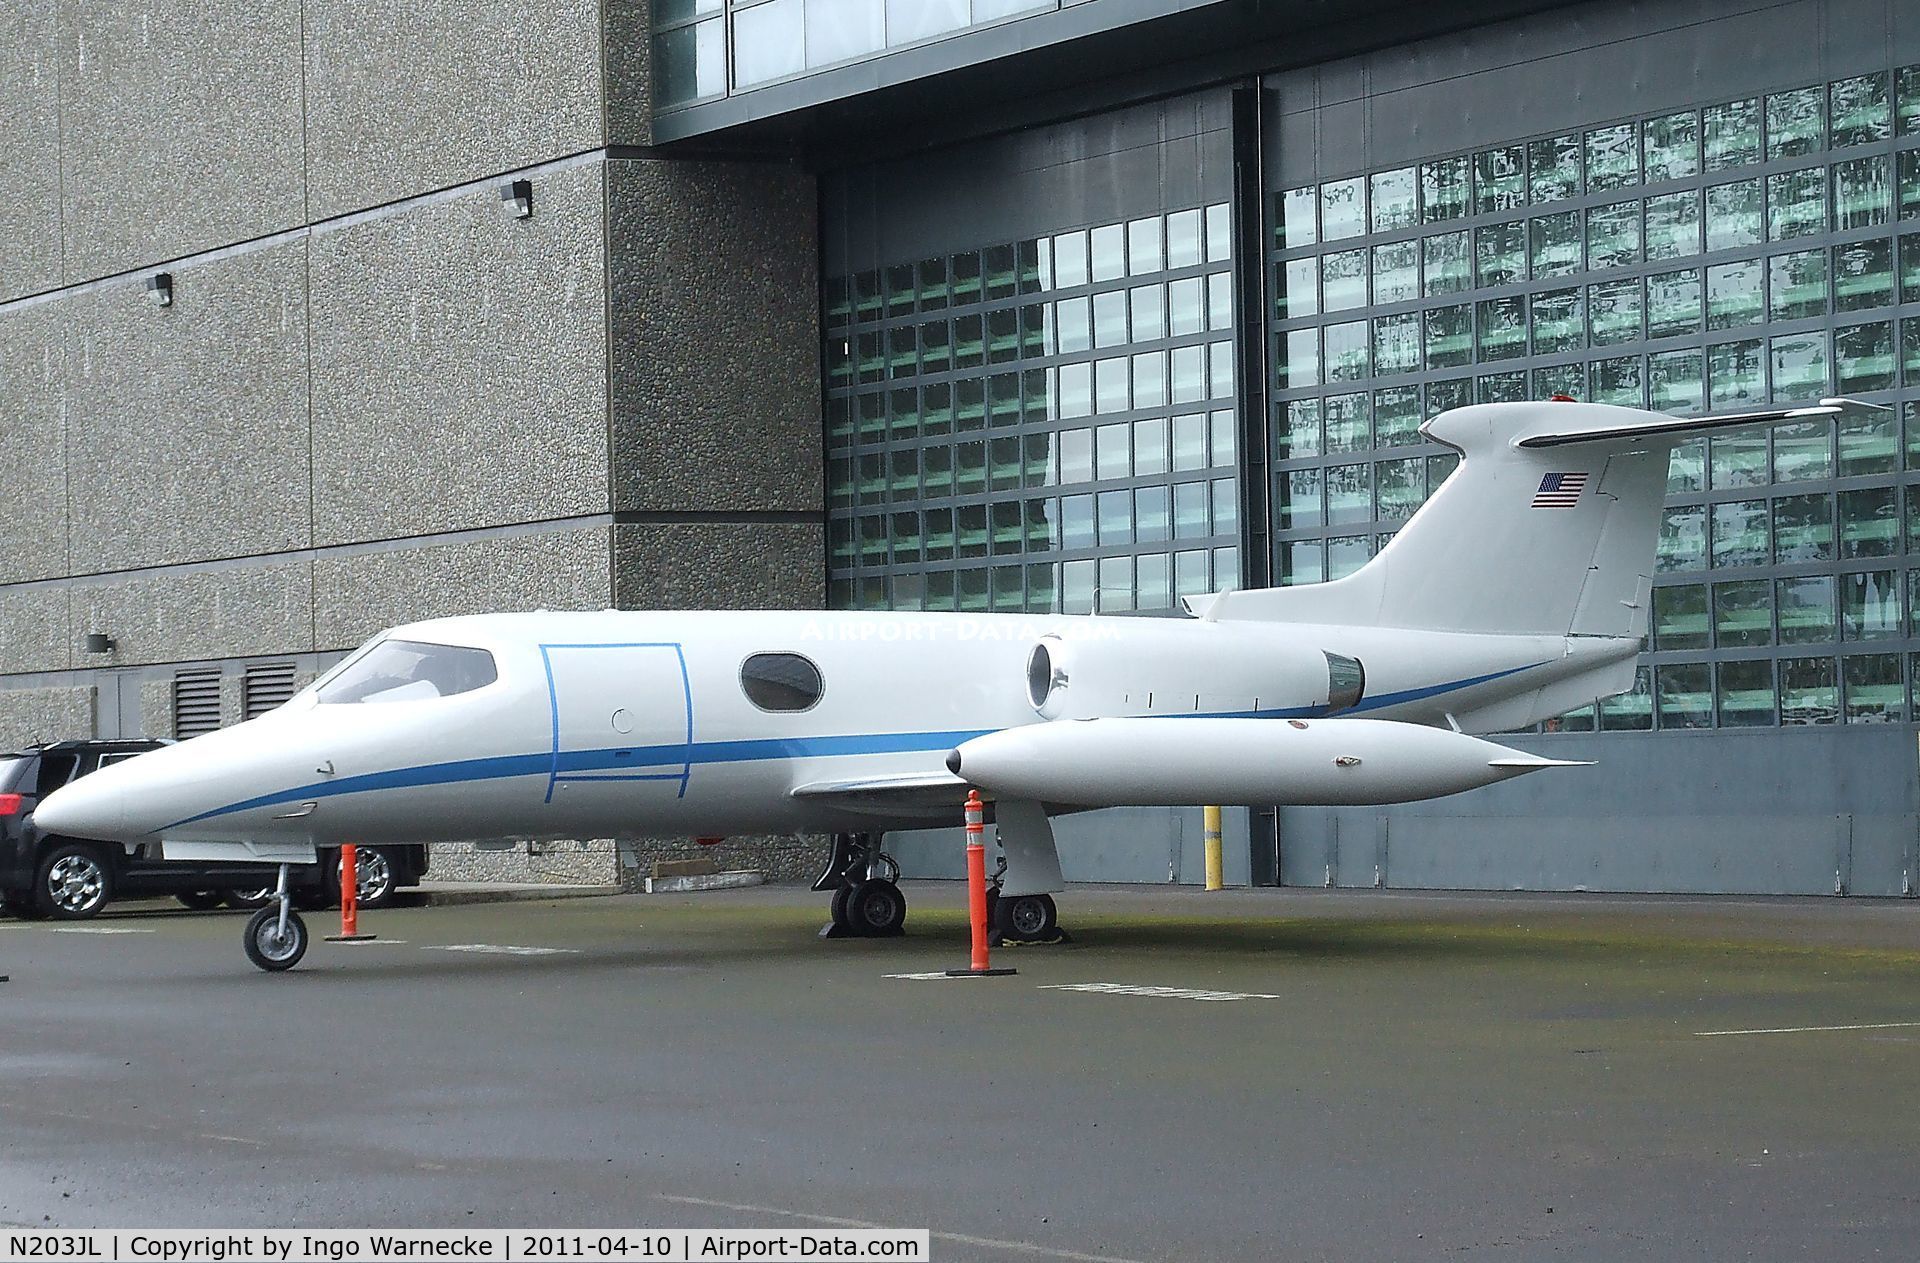 N203JL, 1969 Learjet 24B C/N 203, Lear Learjet 24B at the Evergreen Aviation & Space Museum, McMinnville OR